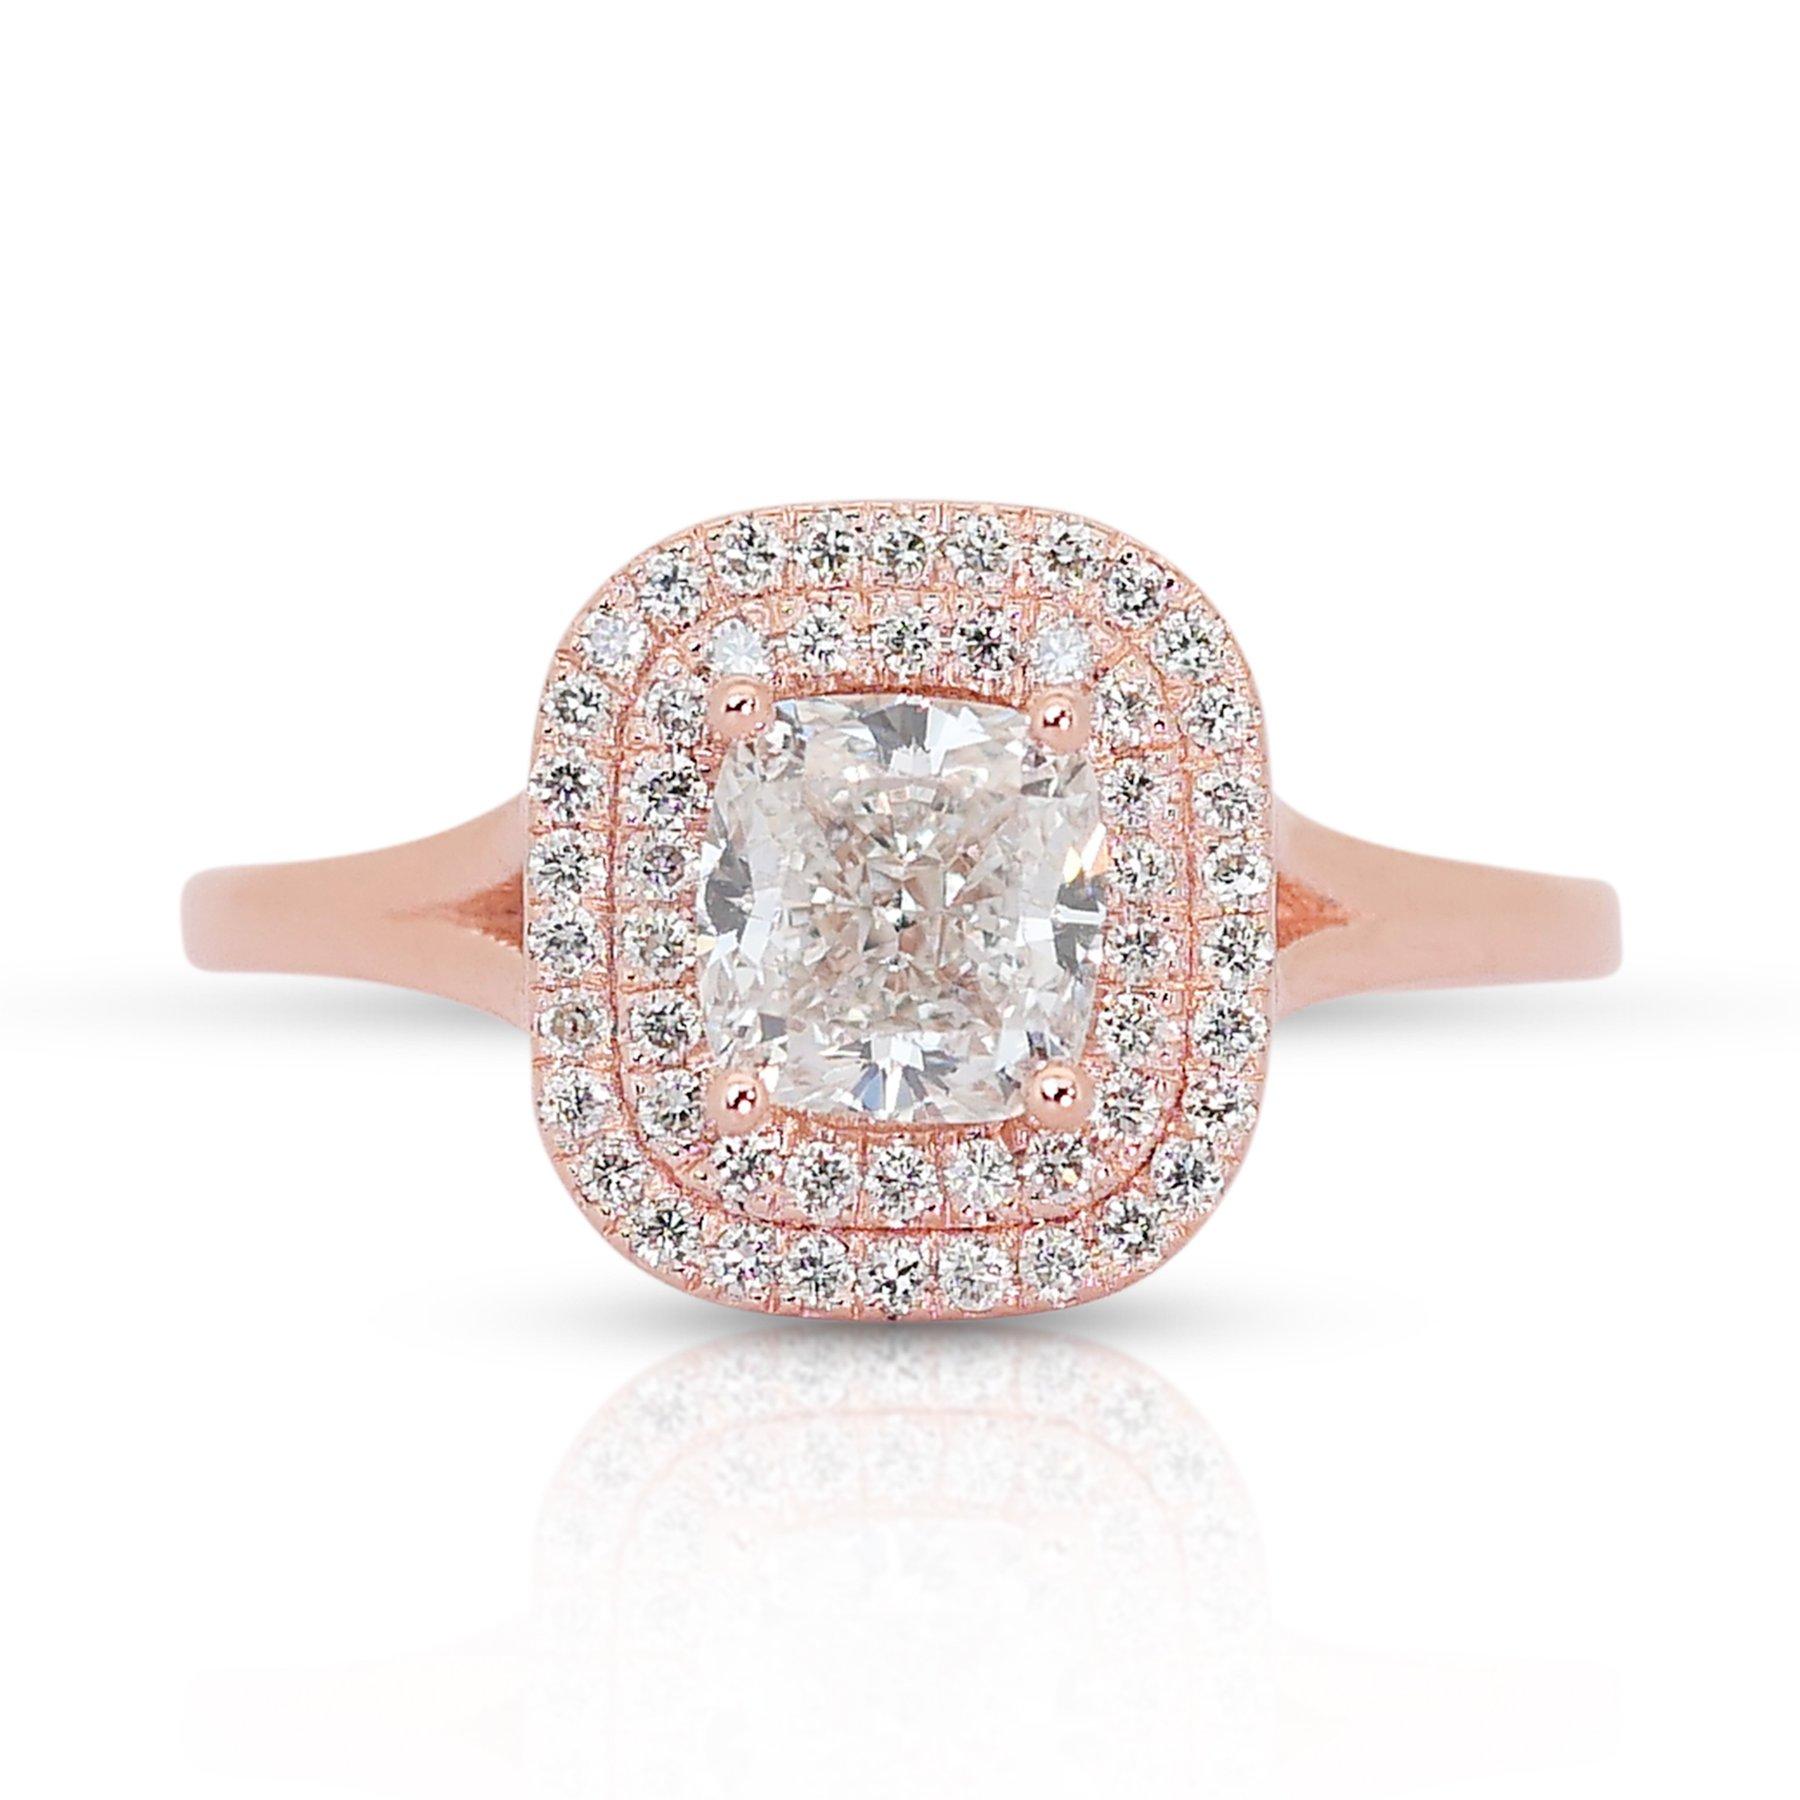 Elegant 1.41ct Diamonds Double Halo Ring in 18k Rose Gold - GIA Certified

Crafted with precision and elegance, this exquisite 18k rose gold halo ring features a stunning 1.18-carat cushion-cut diamond as its centerpiece. Surrounding the central